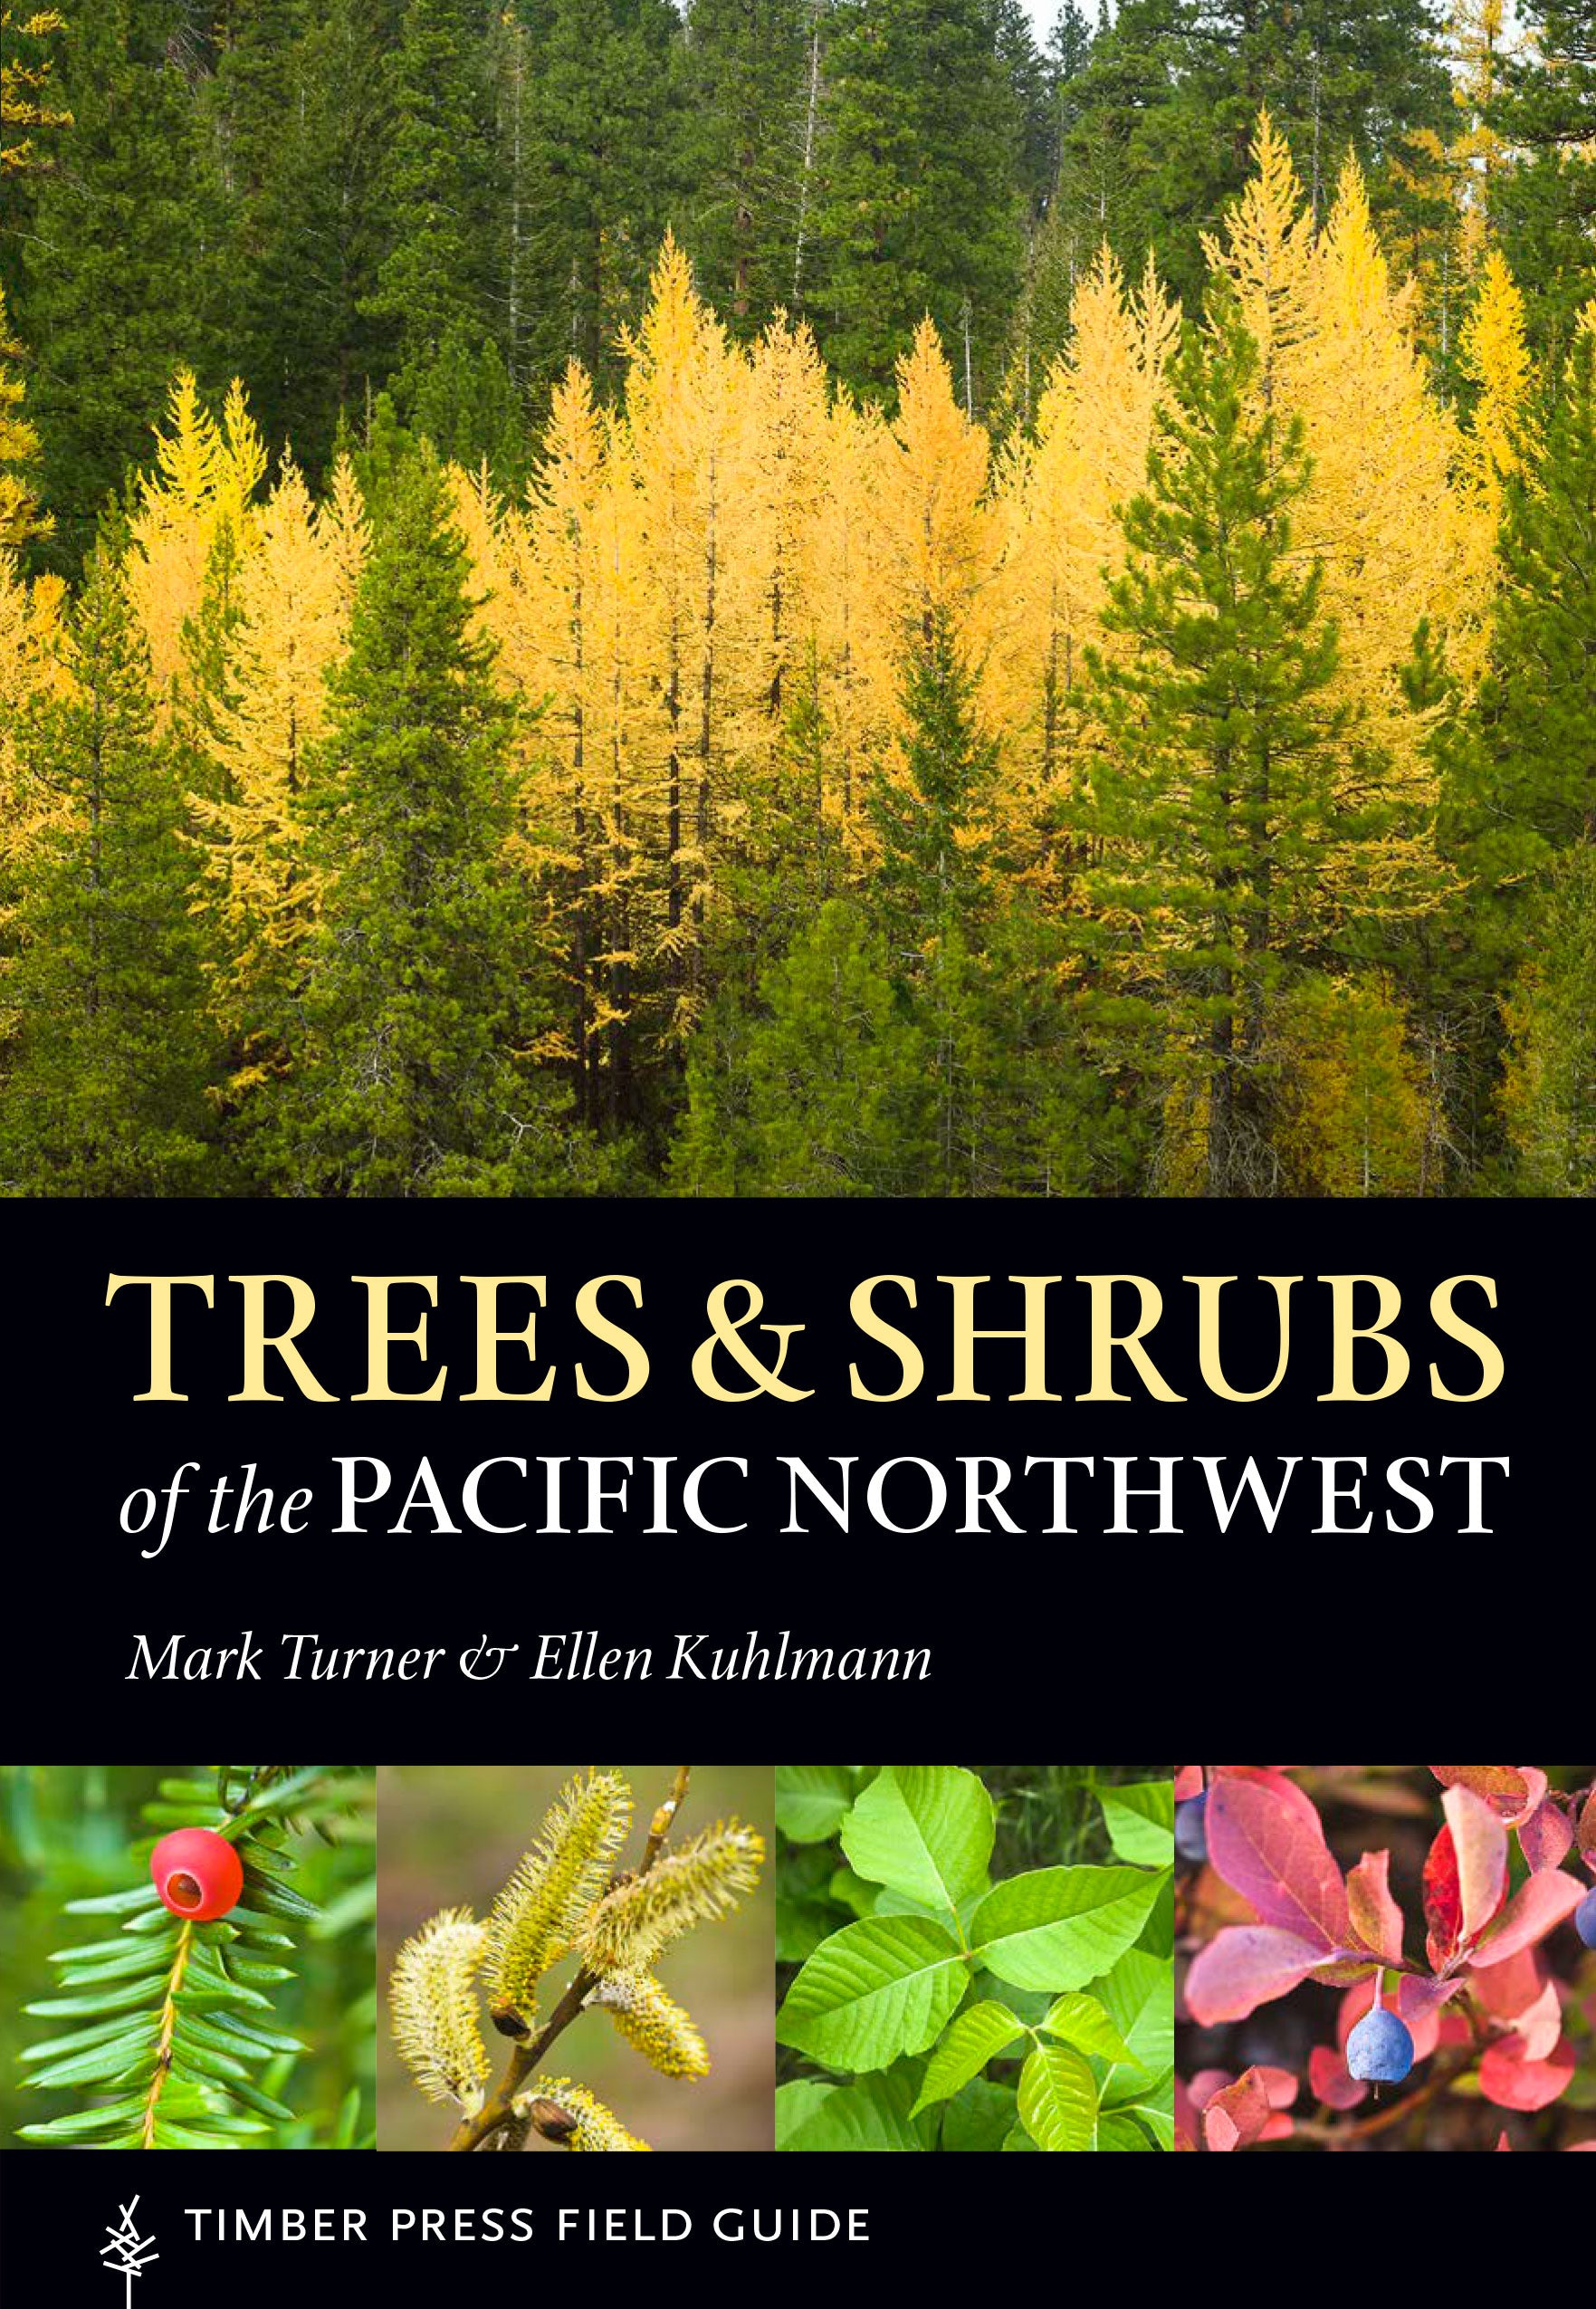 Photos of several different varieties of trees and shrubs, from pines to berry bushes, decorate the cover.